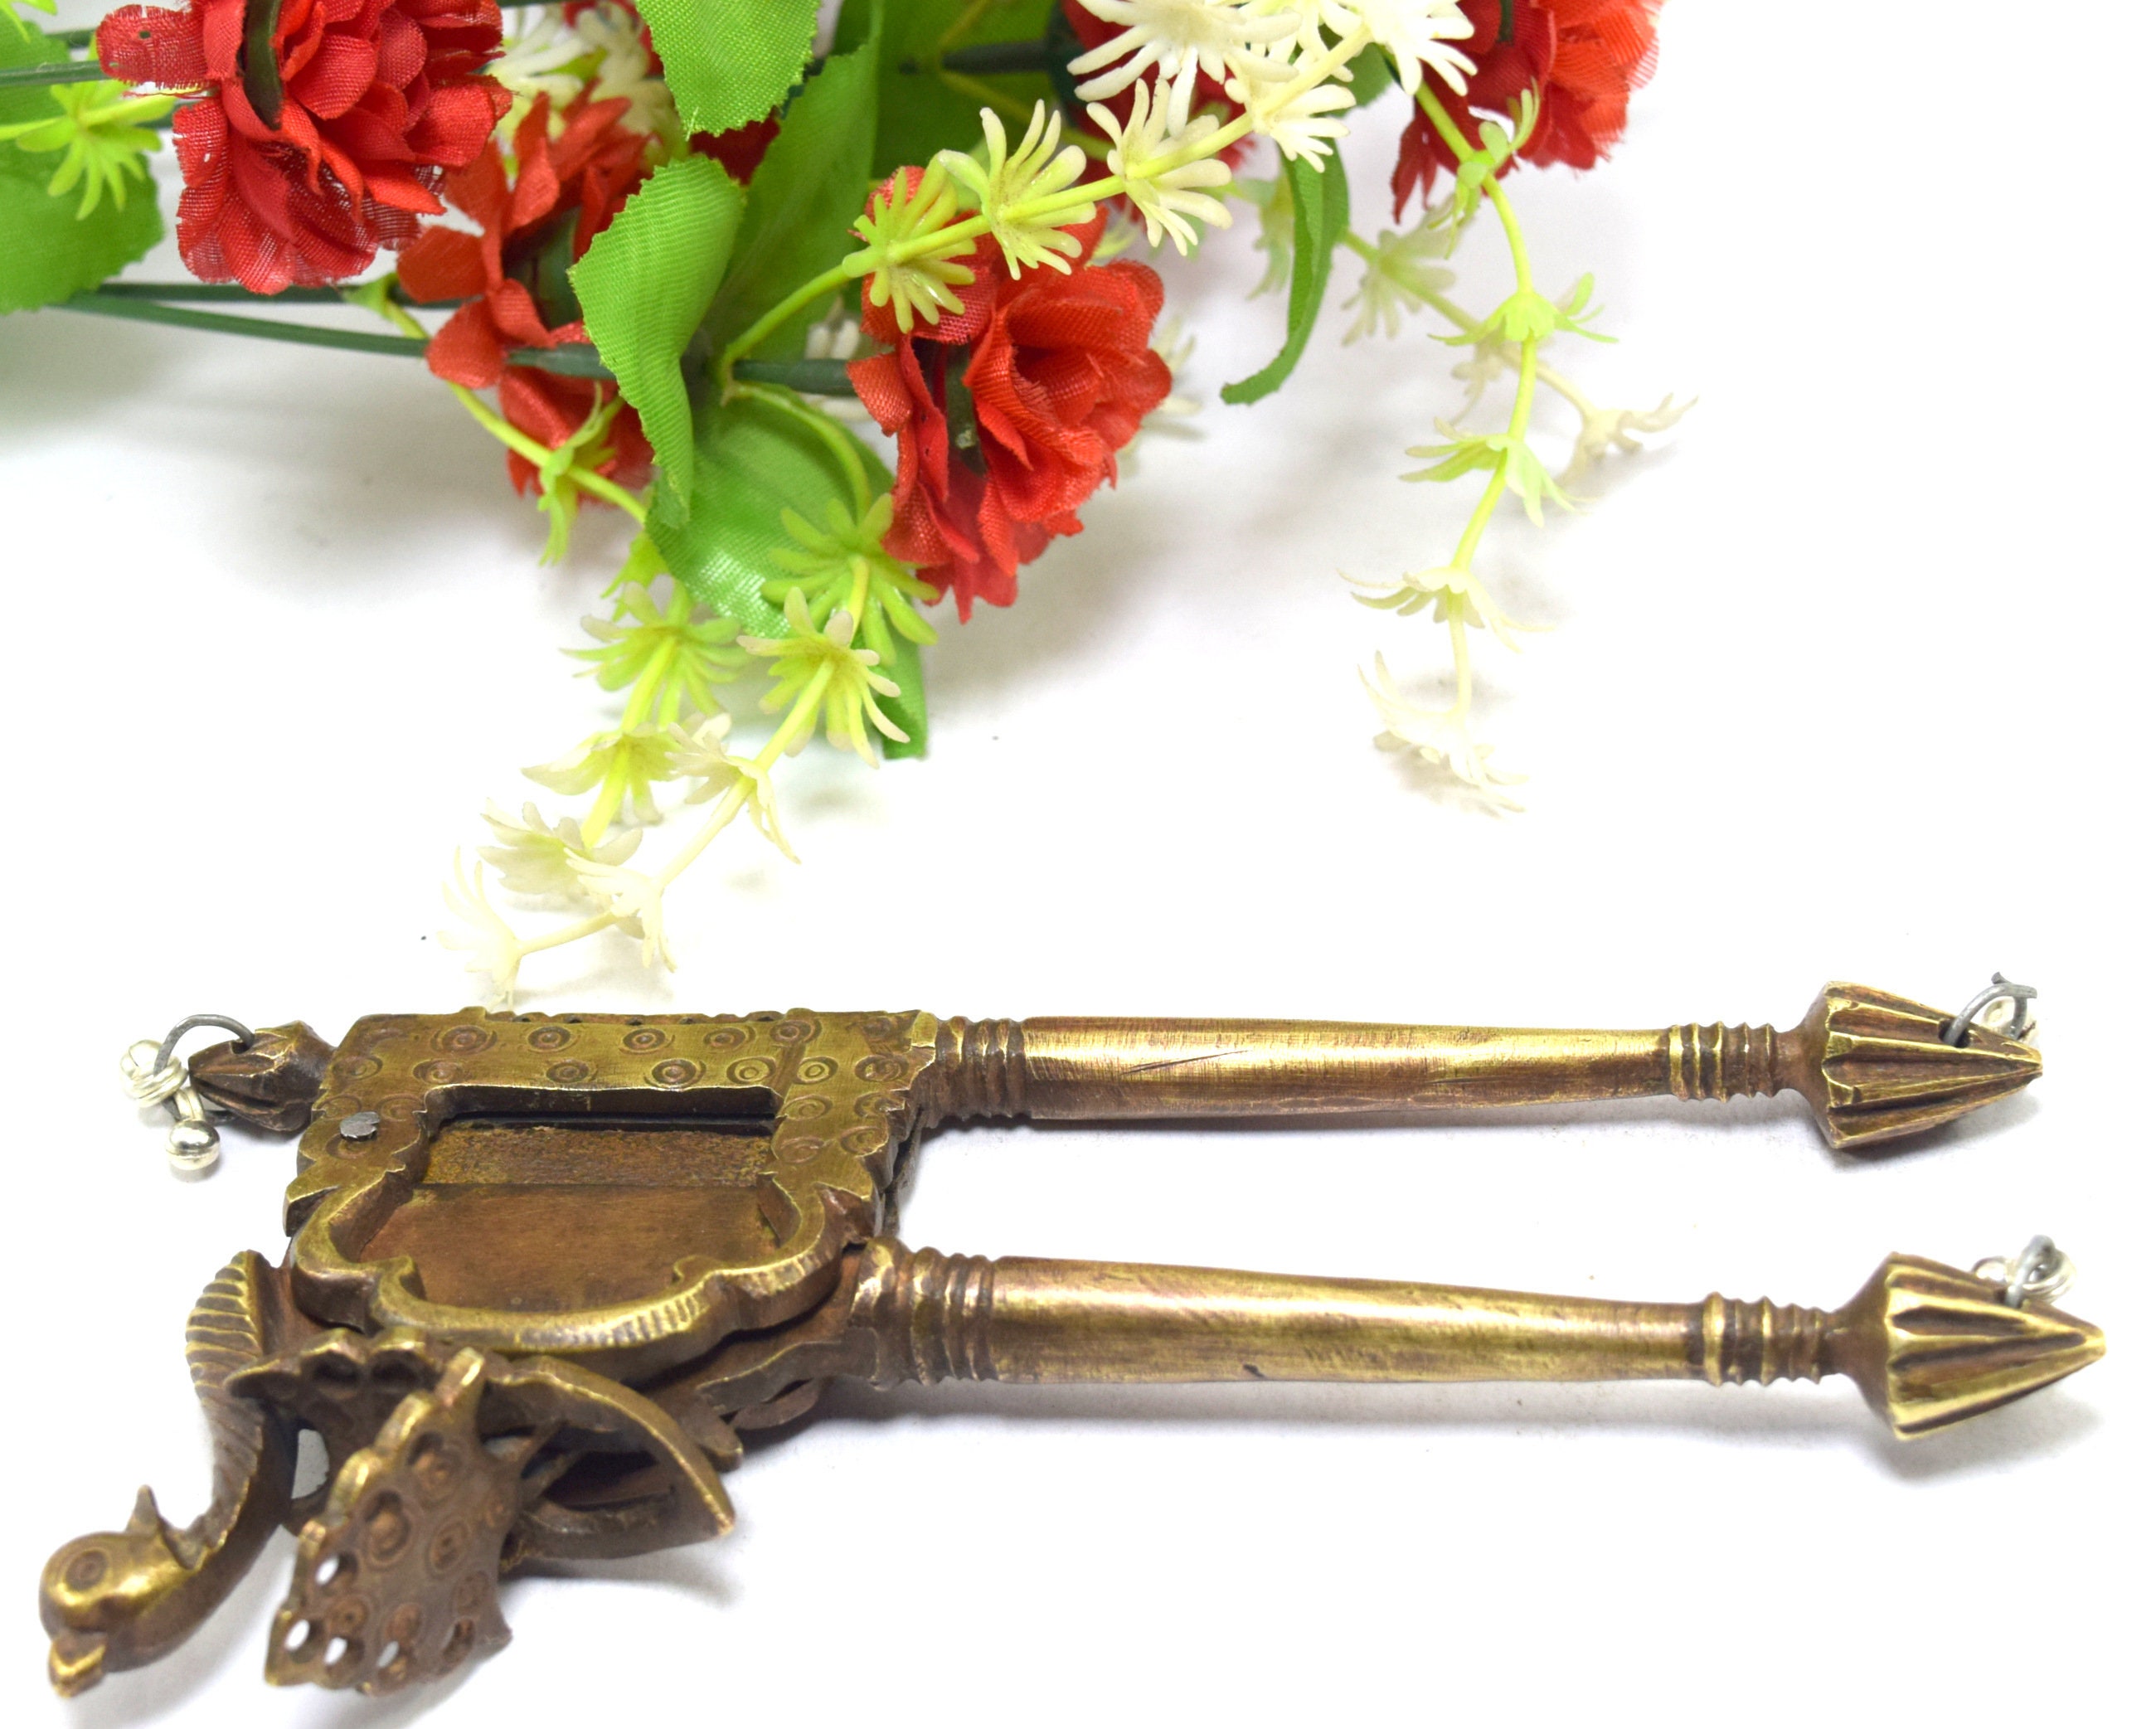 Vintage Brass Horse Betel Nut Cutter, South India (item #1396290)